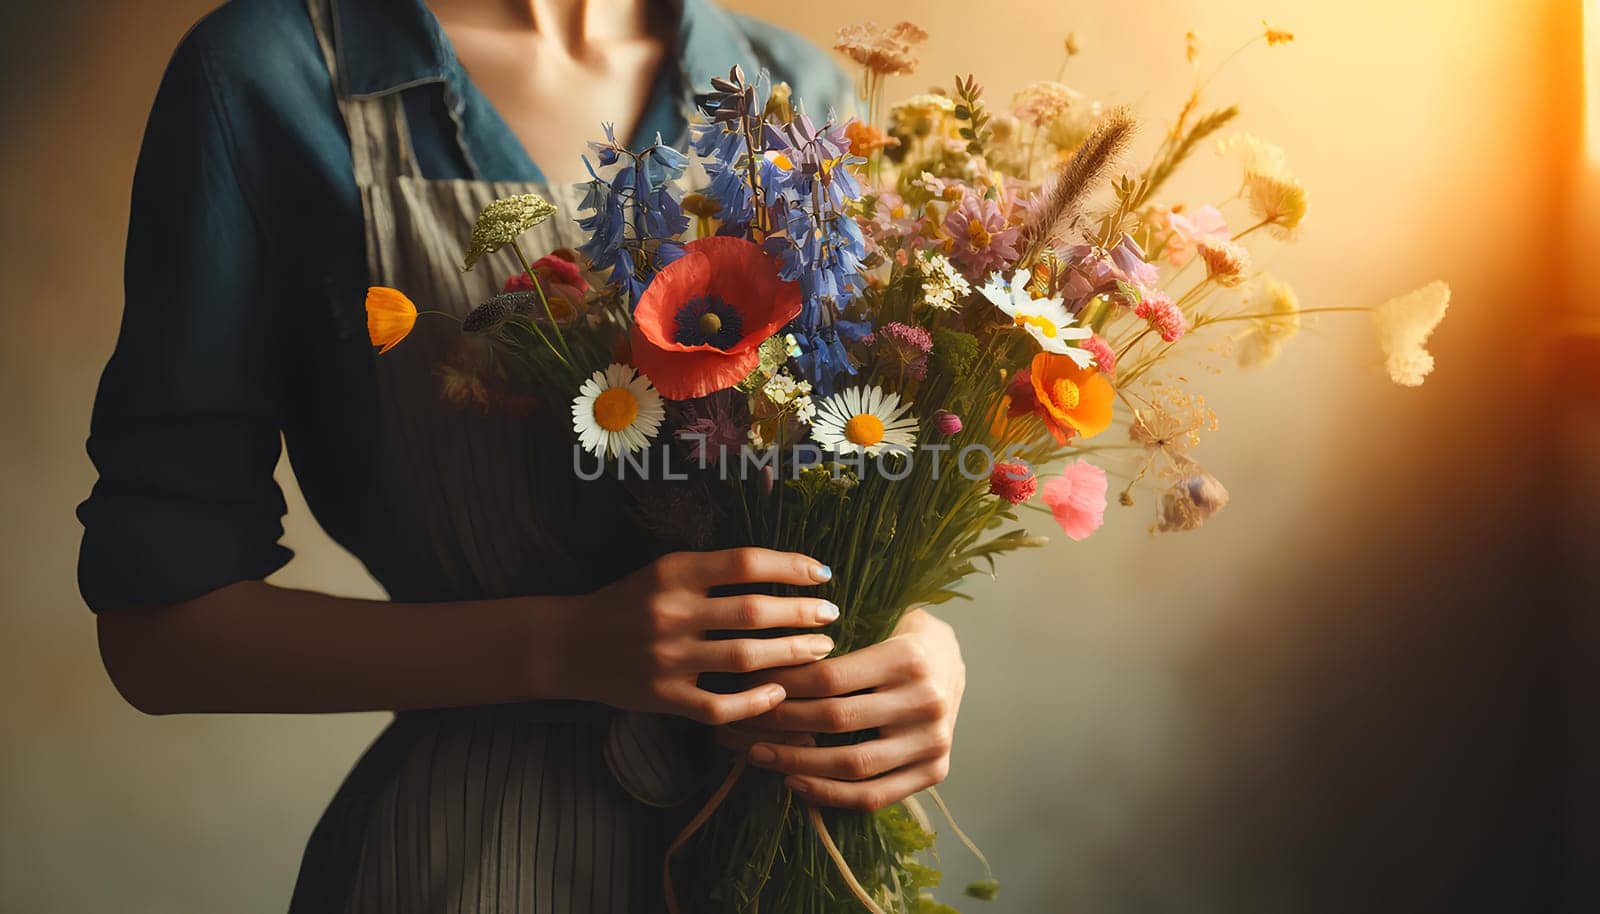 Woman with a bouquet of wild flowers in her hands, close-up by Annado